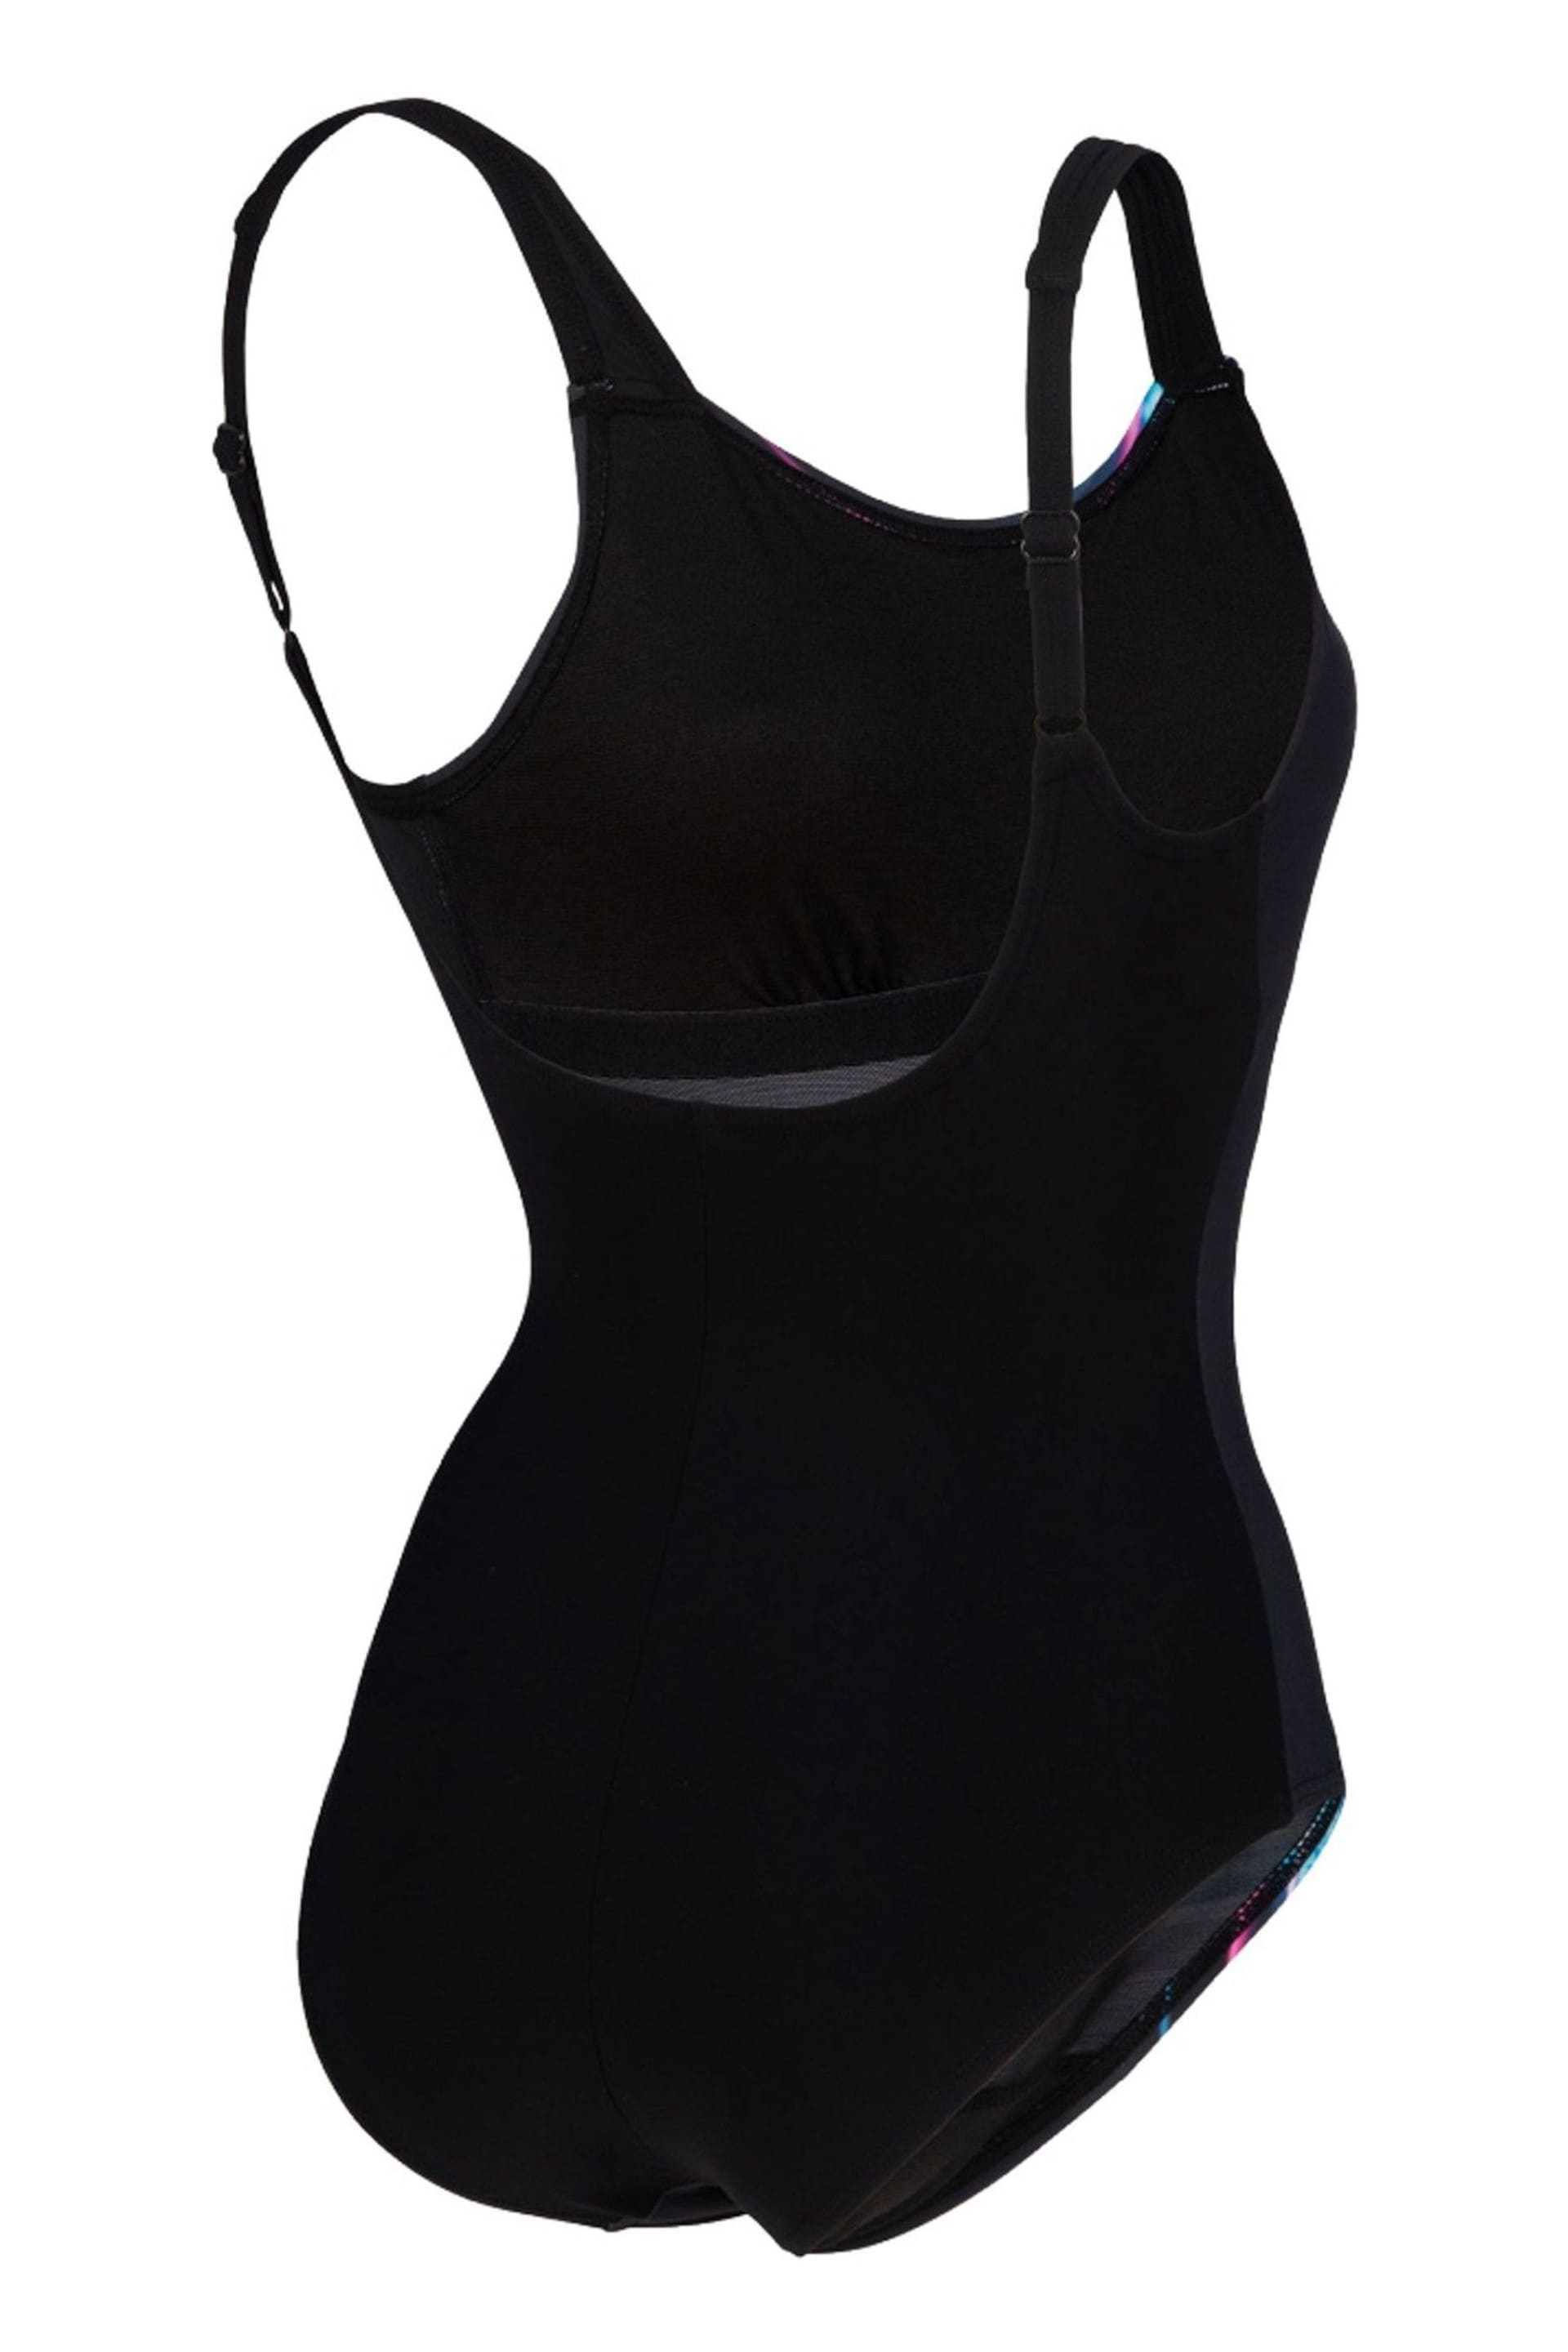 Arena Womens Bodylift Maria B-Cup Black Swimsuit - Image 9 of 9